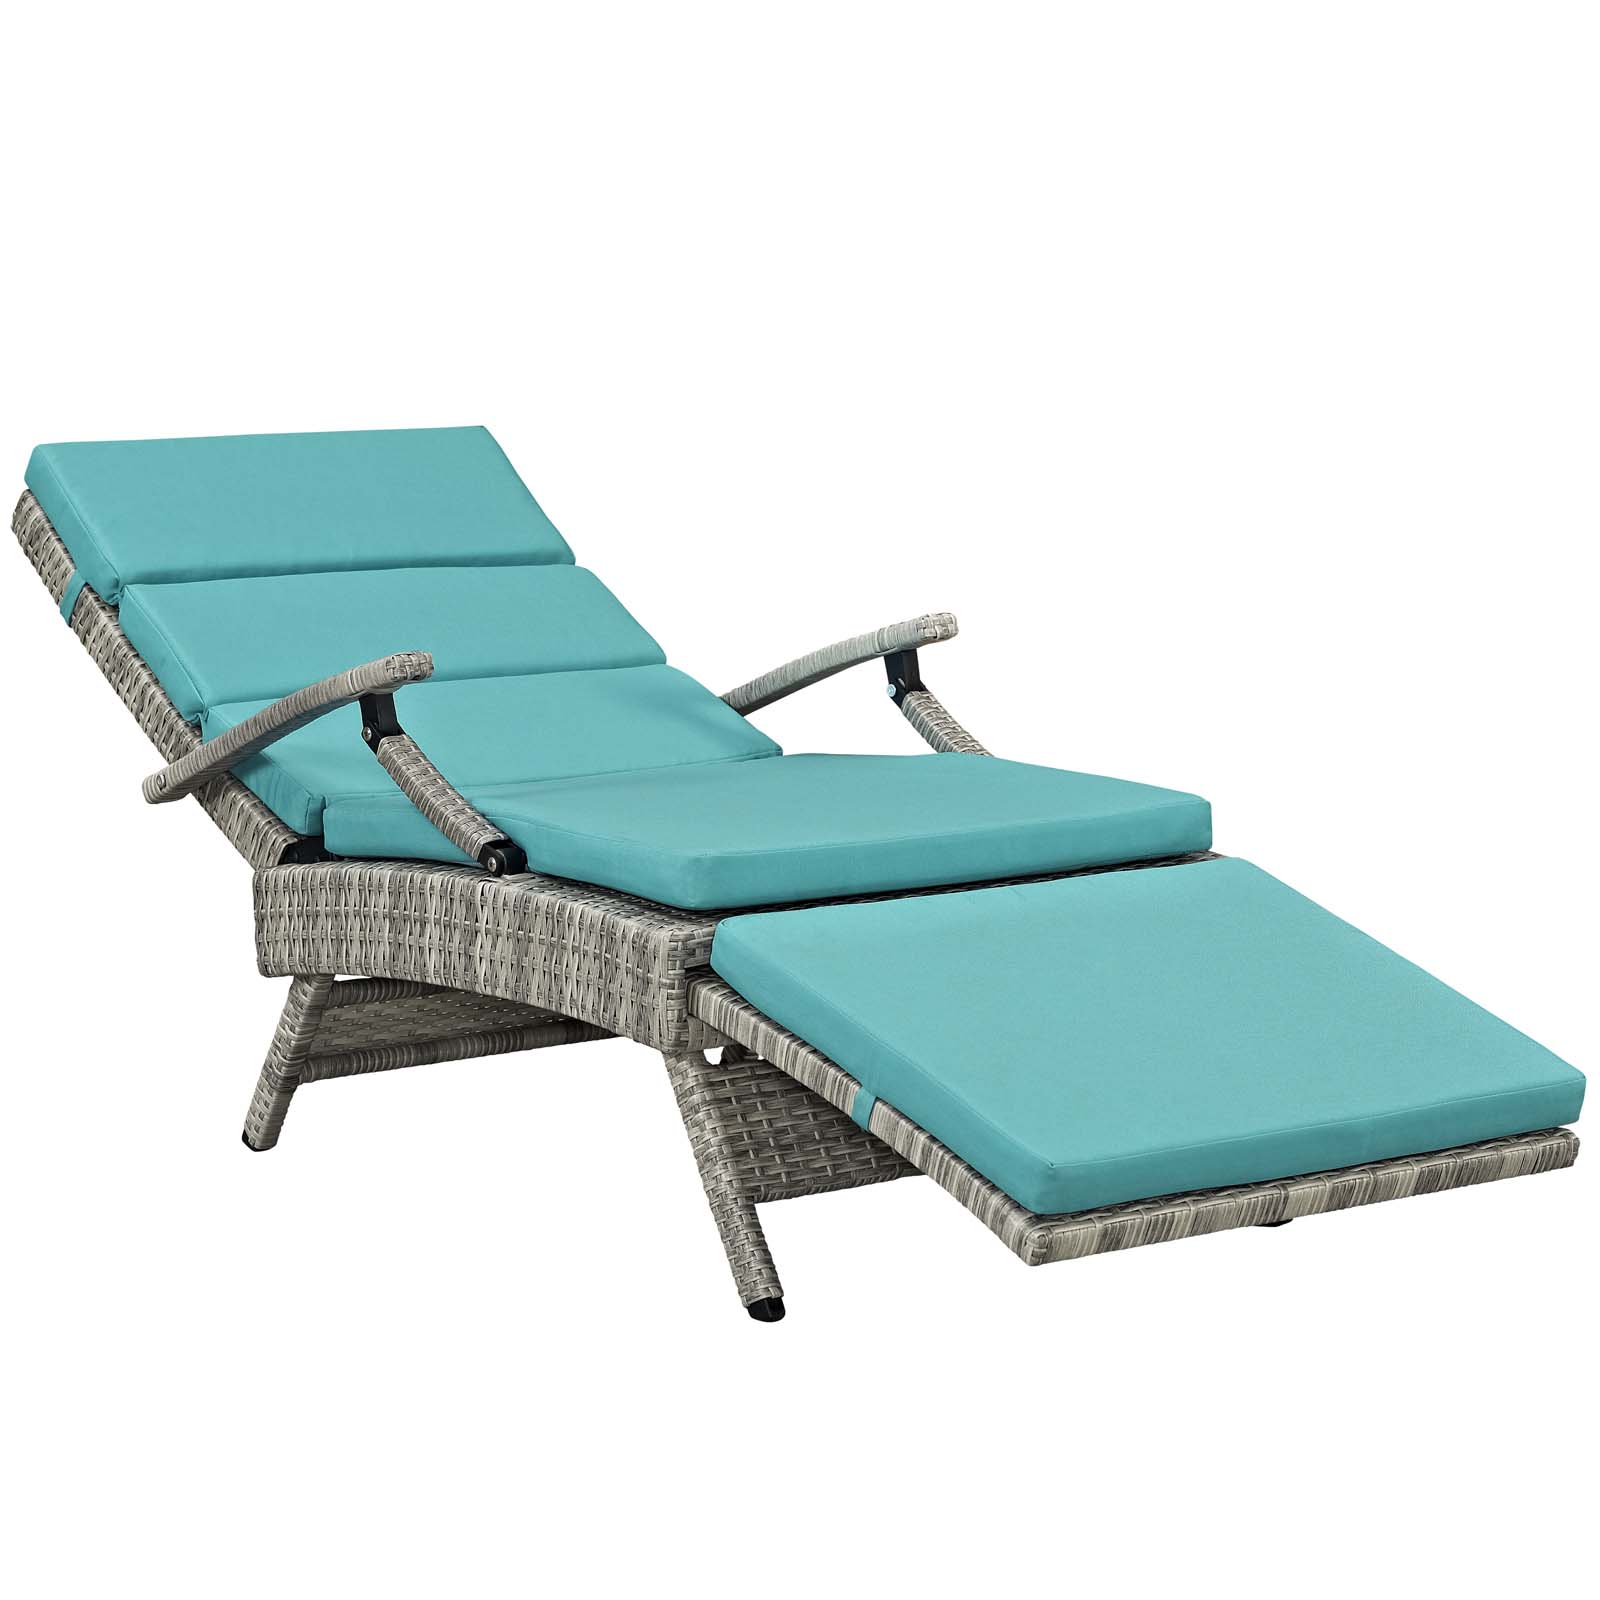 Modway Envisage Chaise Outdoor Patio Wicker Rattan Lounge Chair in Light Gray Turquoise - image 5 of 10